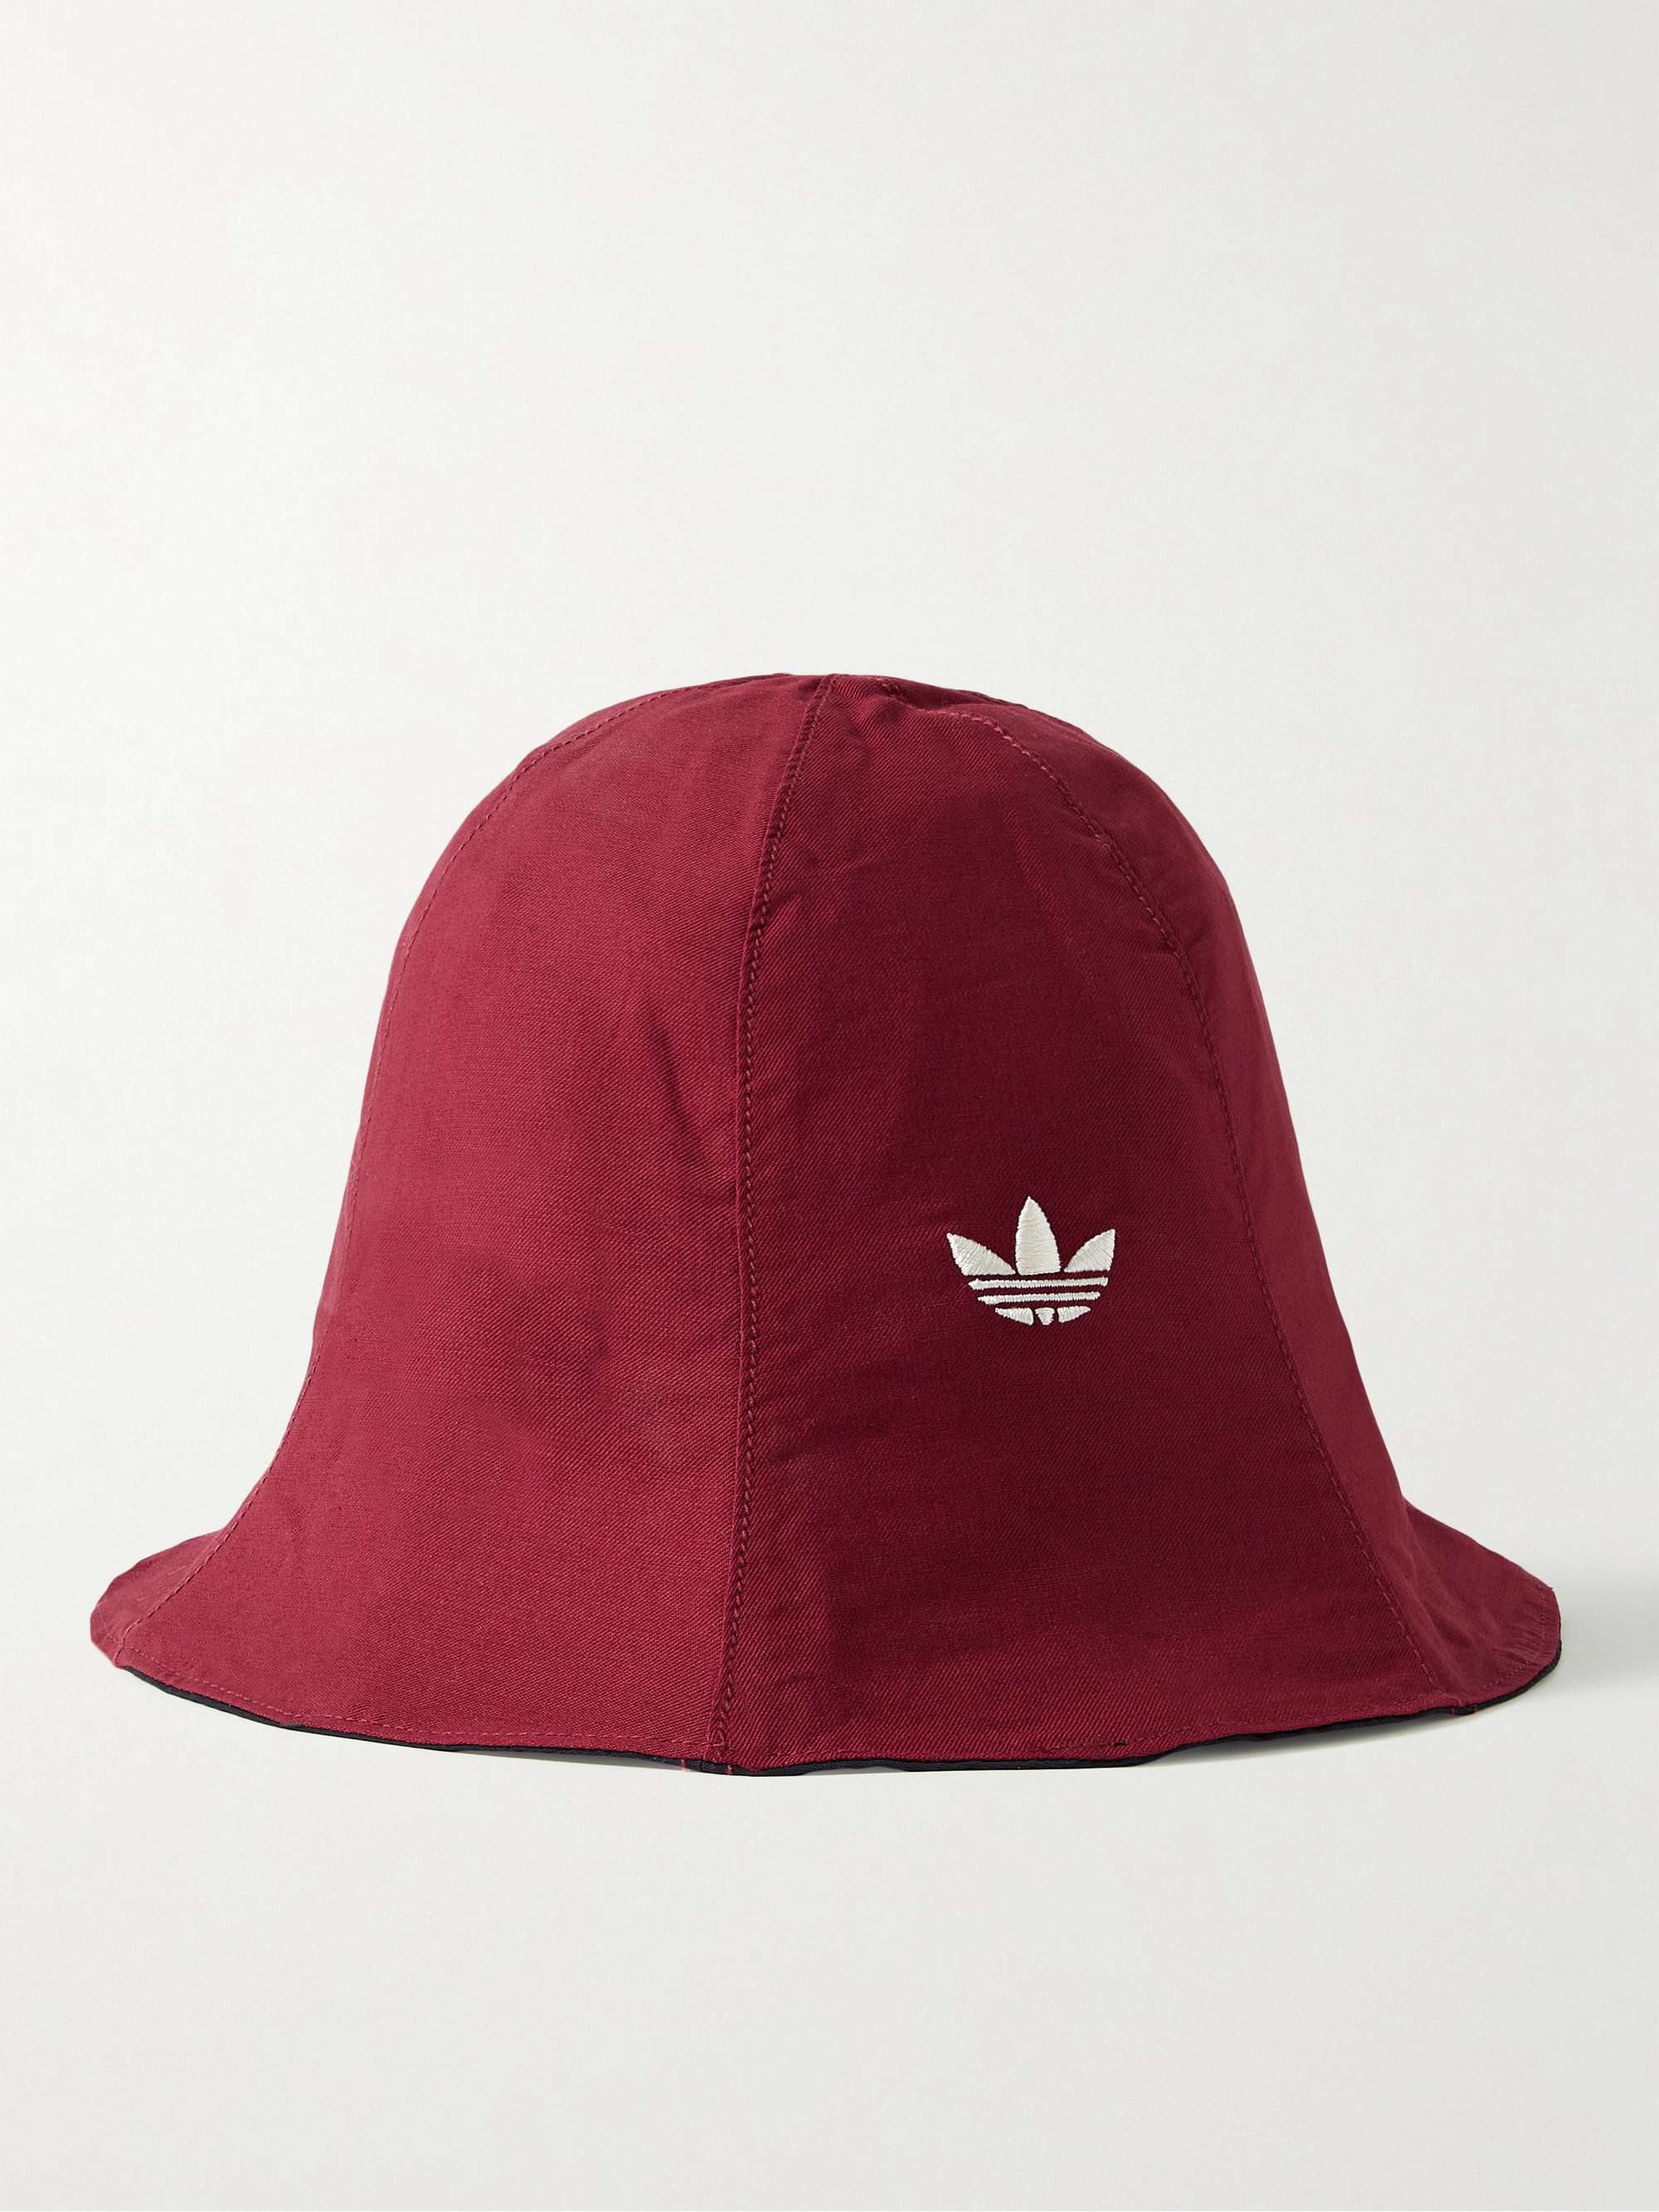 ADIDAS CONSORTIUM + Wales Bonner Reversible Shell and Cotton-Twill Bucket Hat